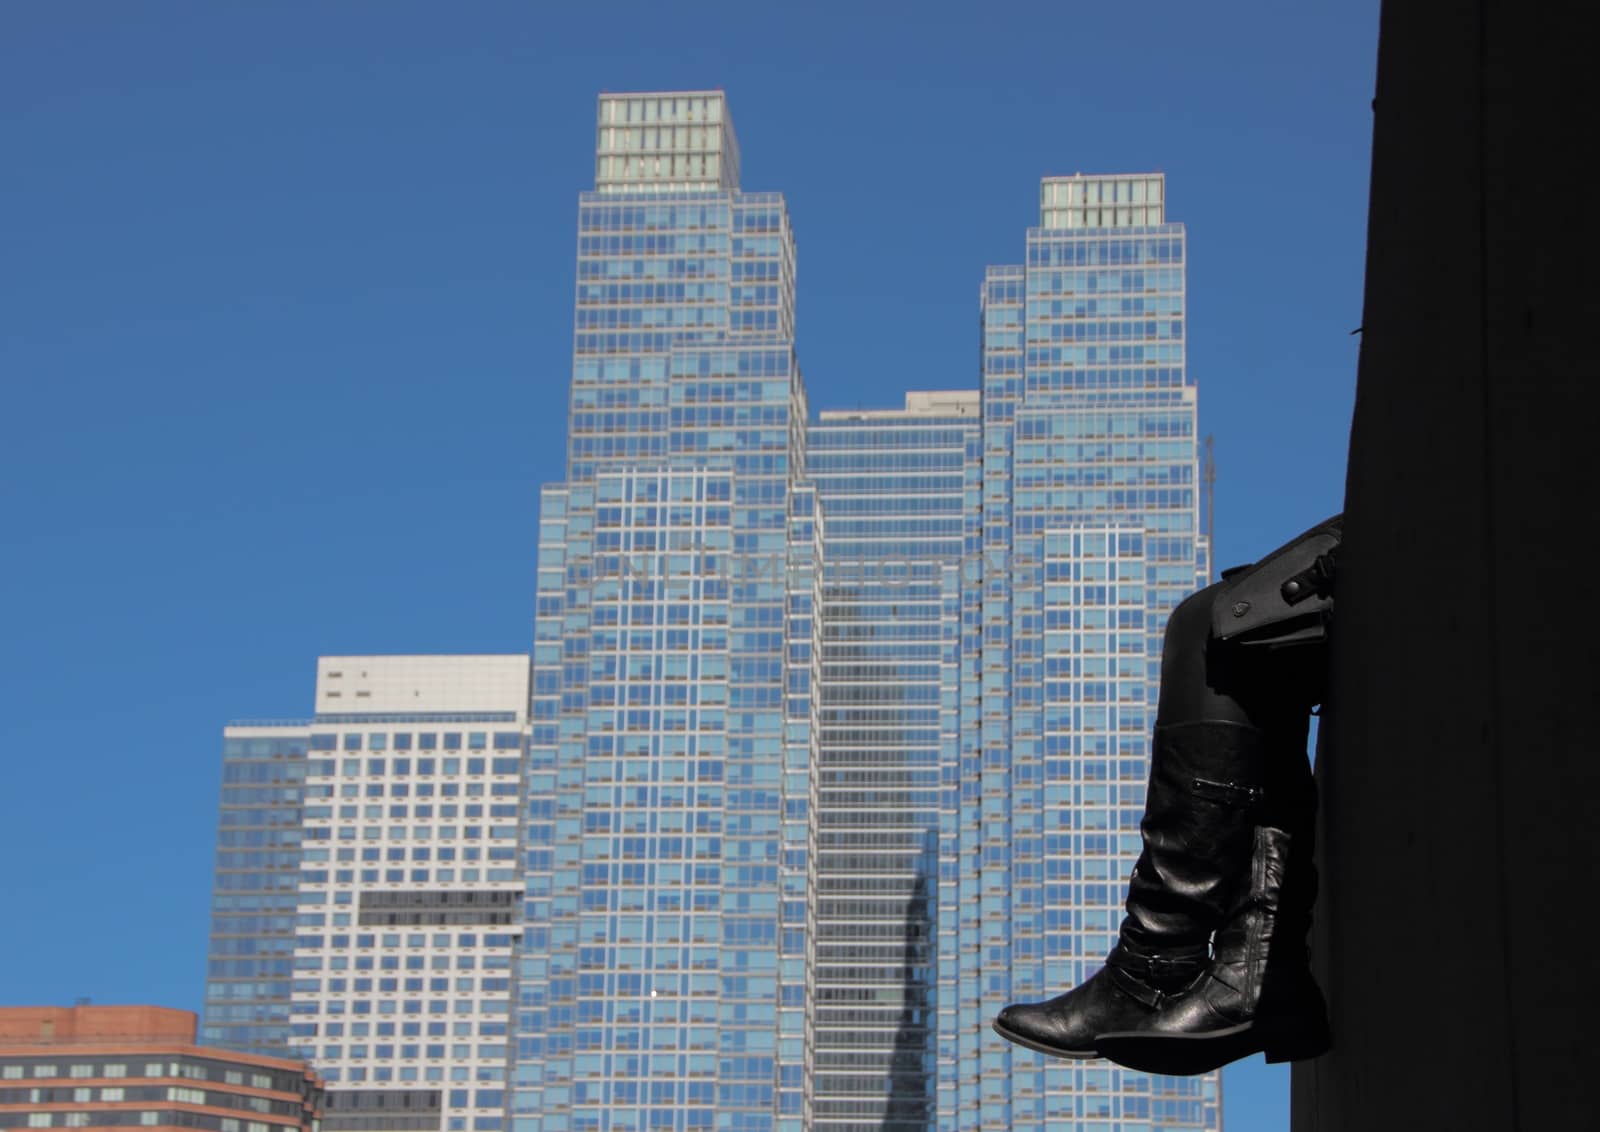 Resting Black Leather Boots with Skyscraper Background by HoleInTheBox